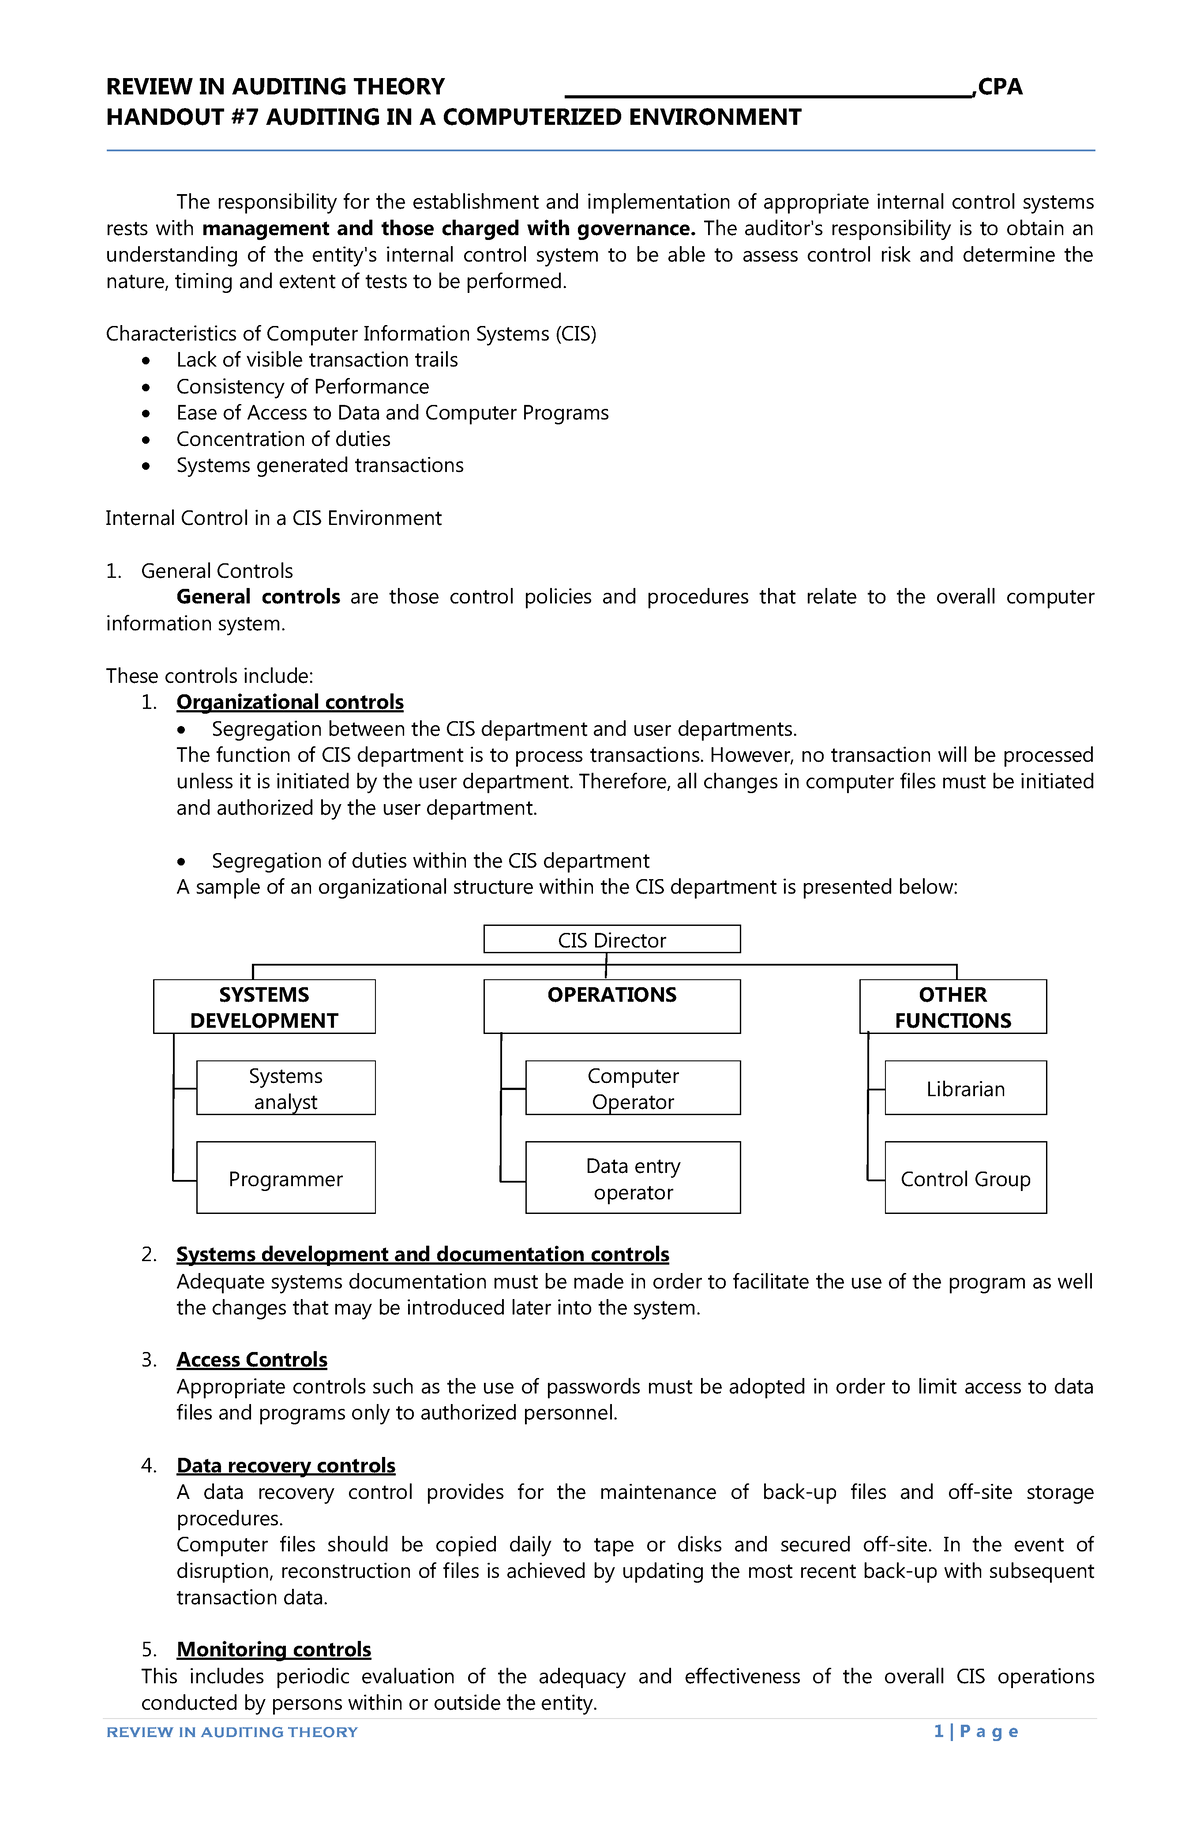 Handout #7 Auditing IN A Computerized Environment - REVIEW IN AUDITING ...